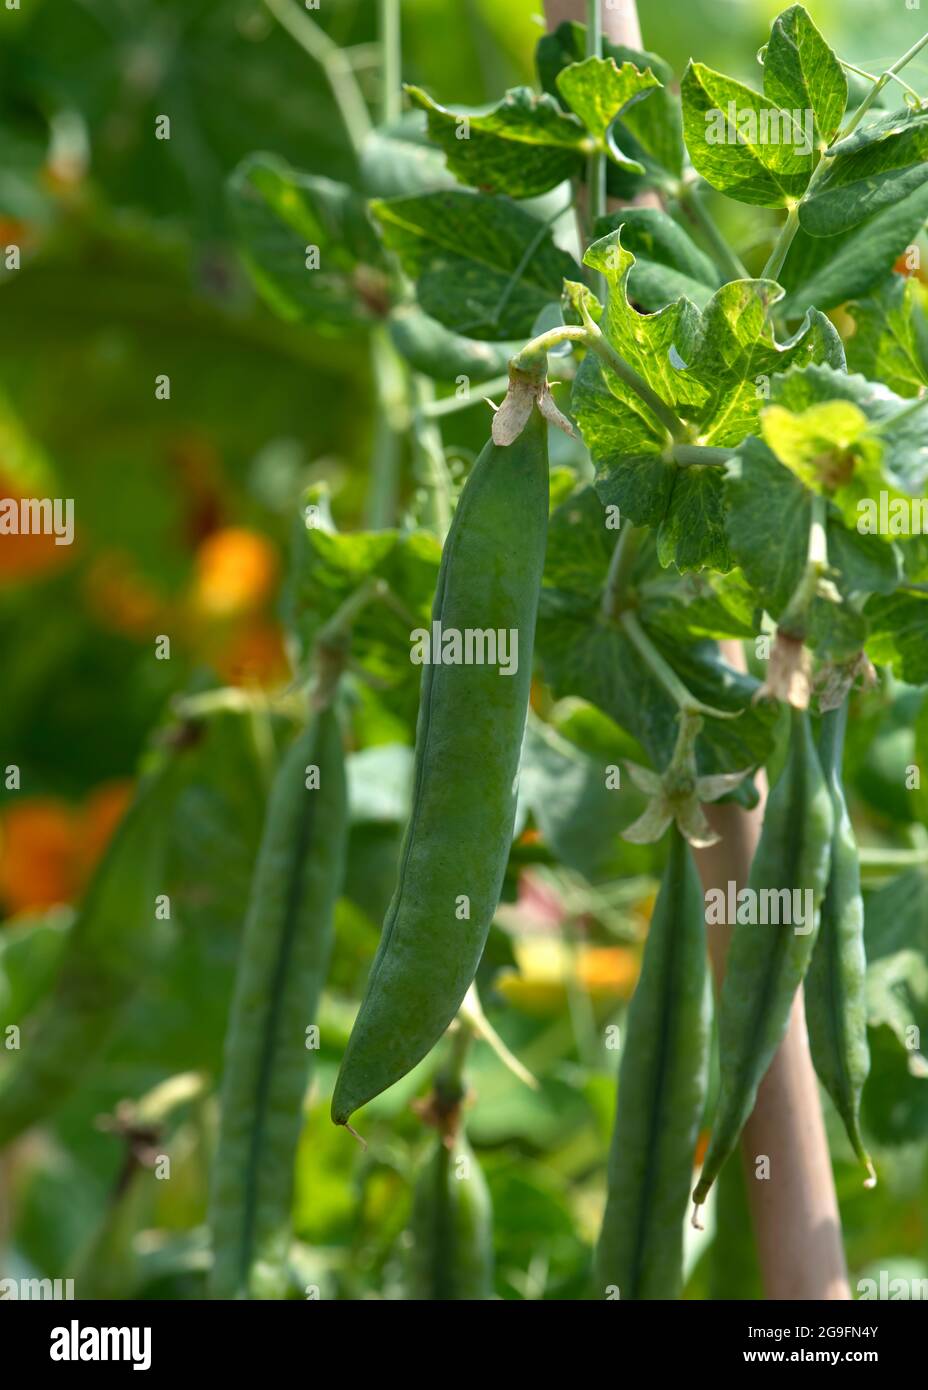 pea plant showing unopened pods in a graden setting or allotment  vertical image with copy space and blurred background Stock Photo